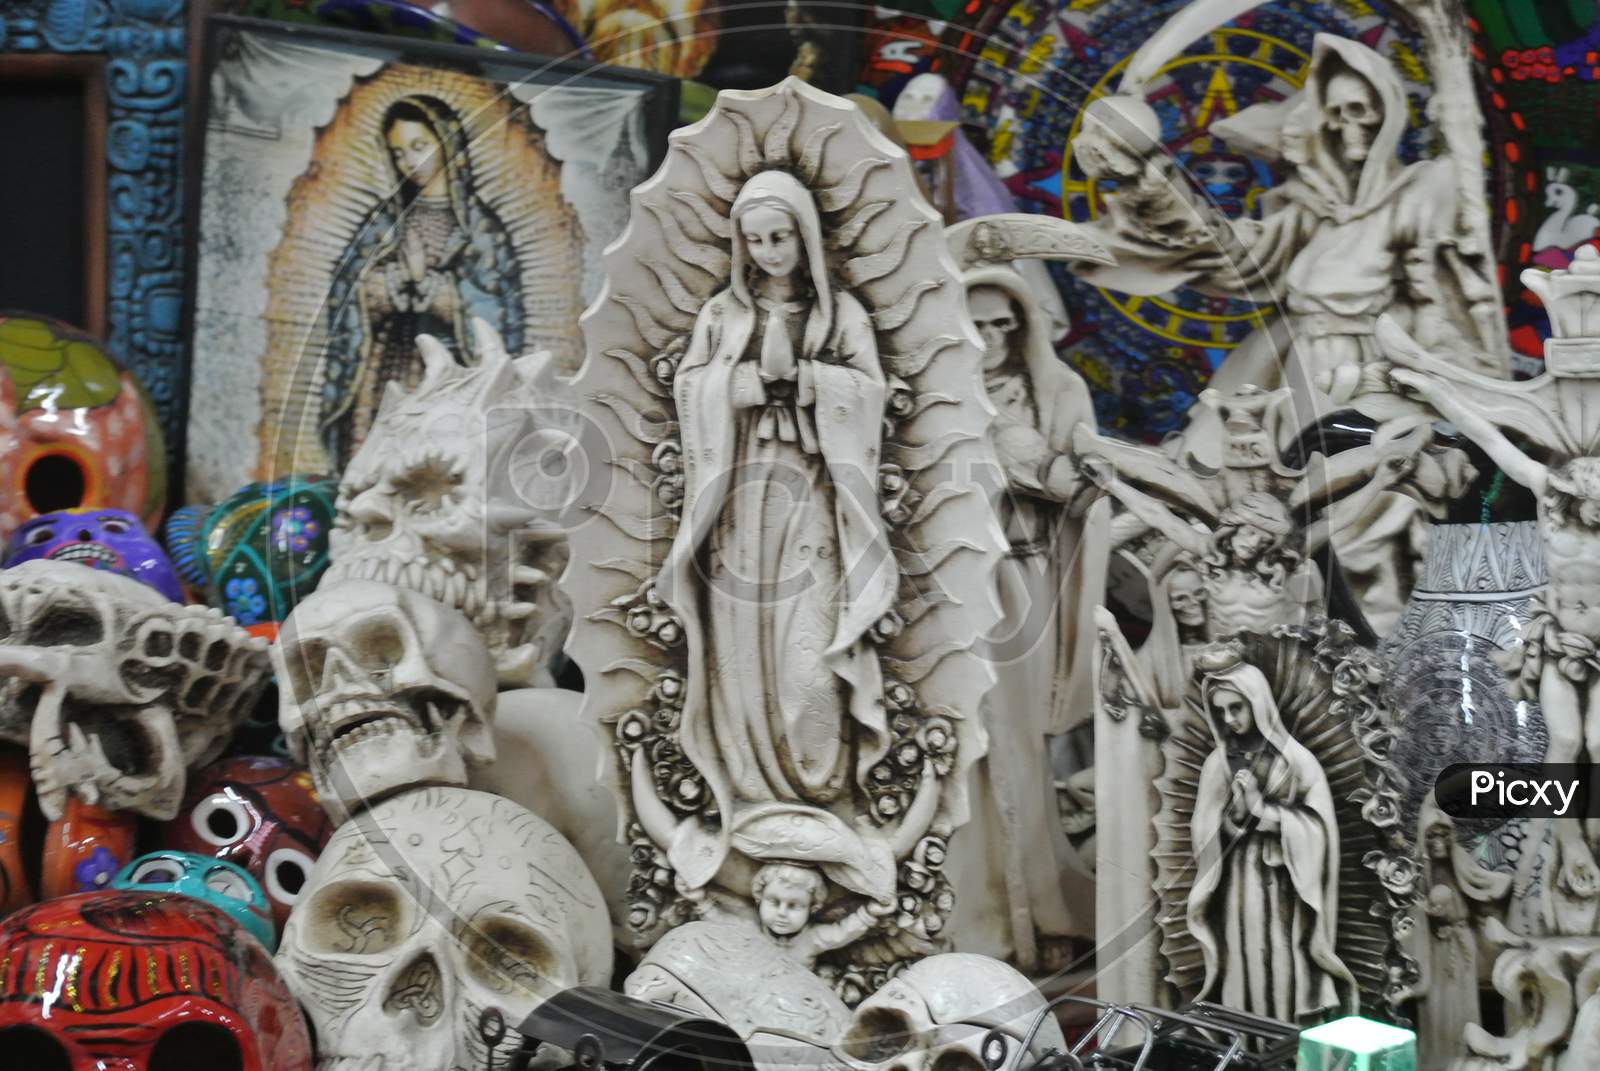 Statue Of The Virgin Mary Along With Skull And Other Carvings In A Souvenir Shop In Mexico